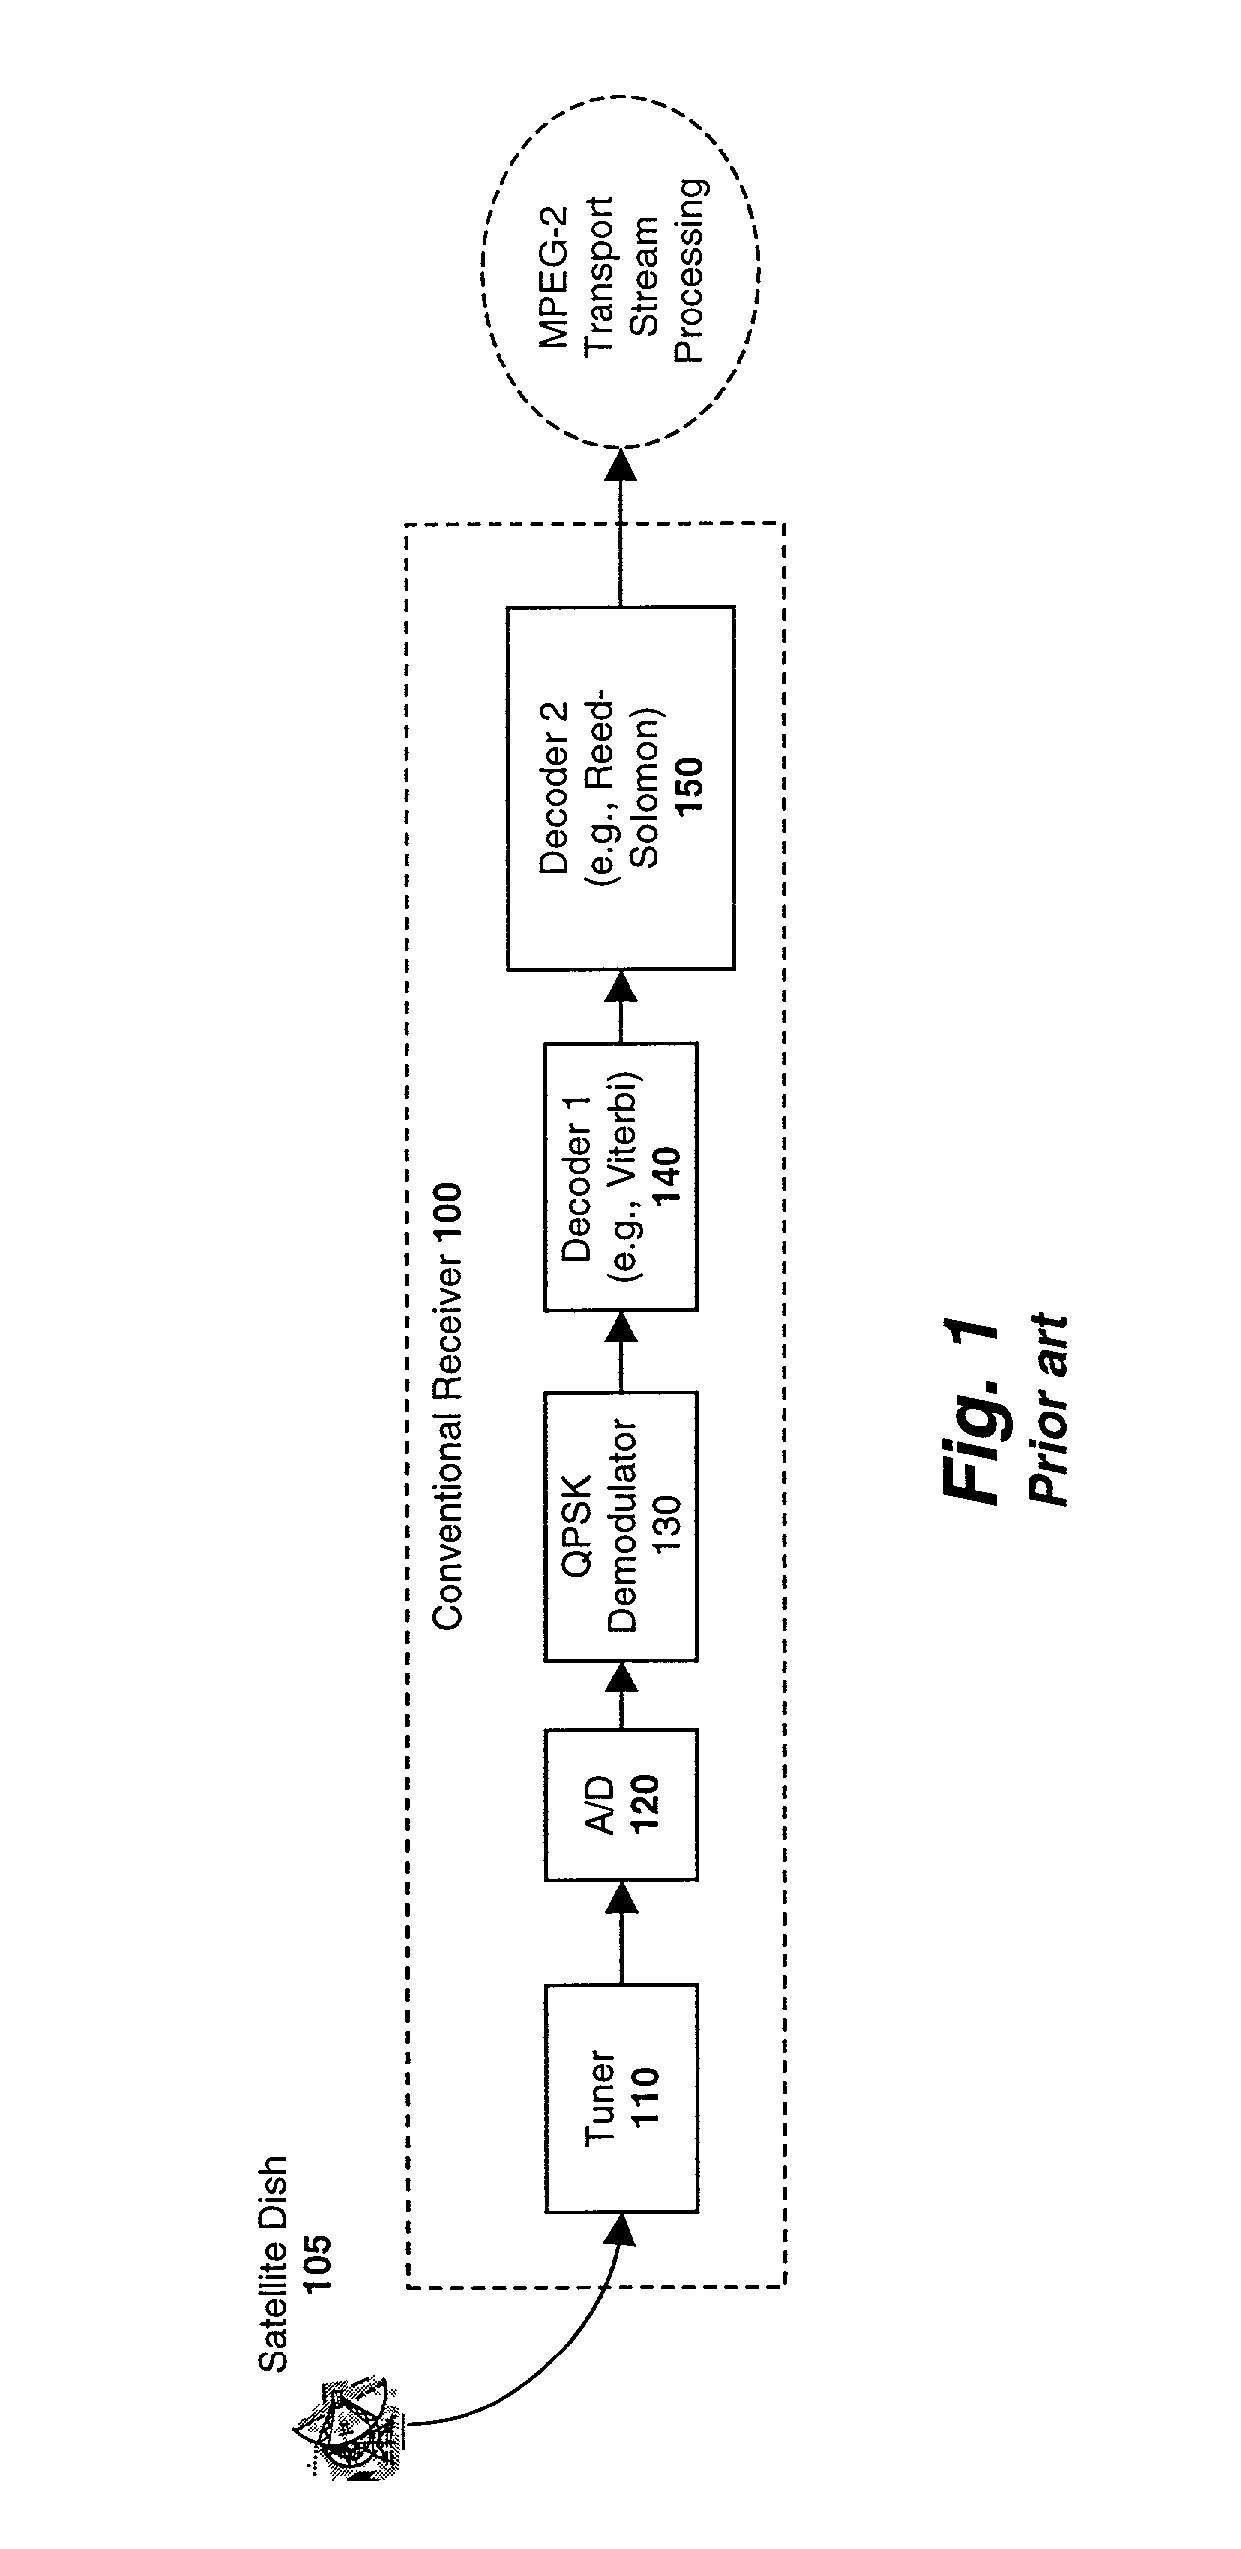 Apparatus and method for decode arbitration in a multi-stream multimedia system